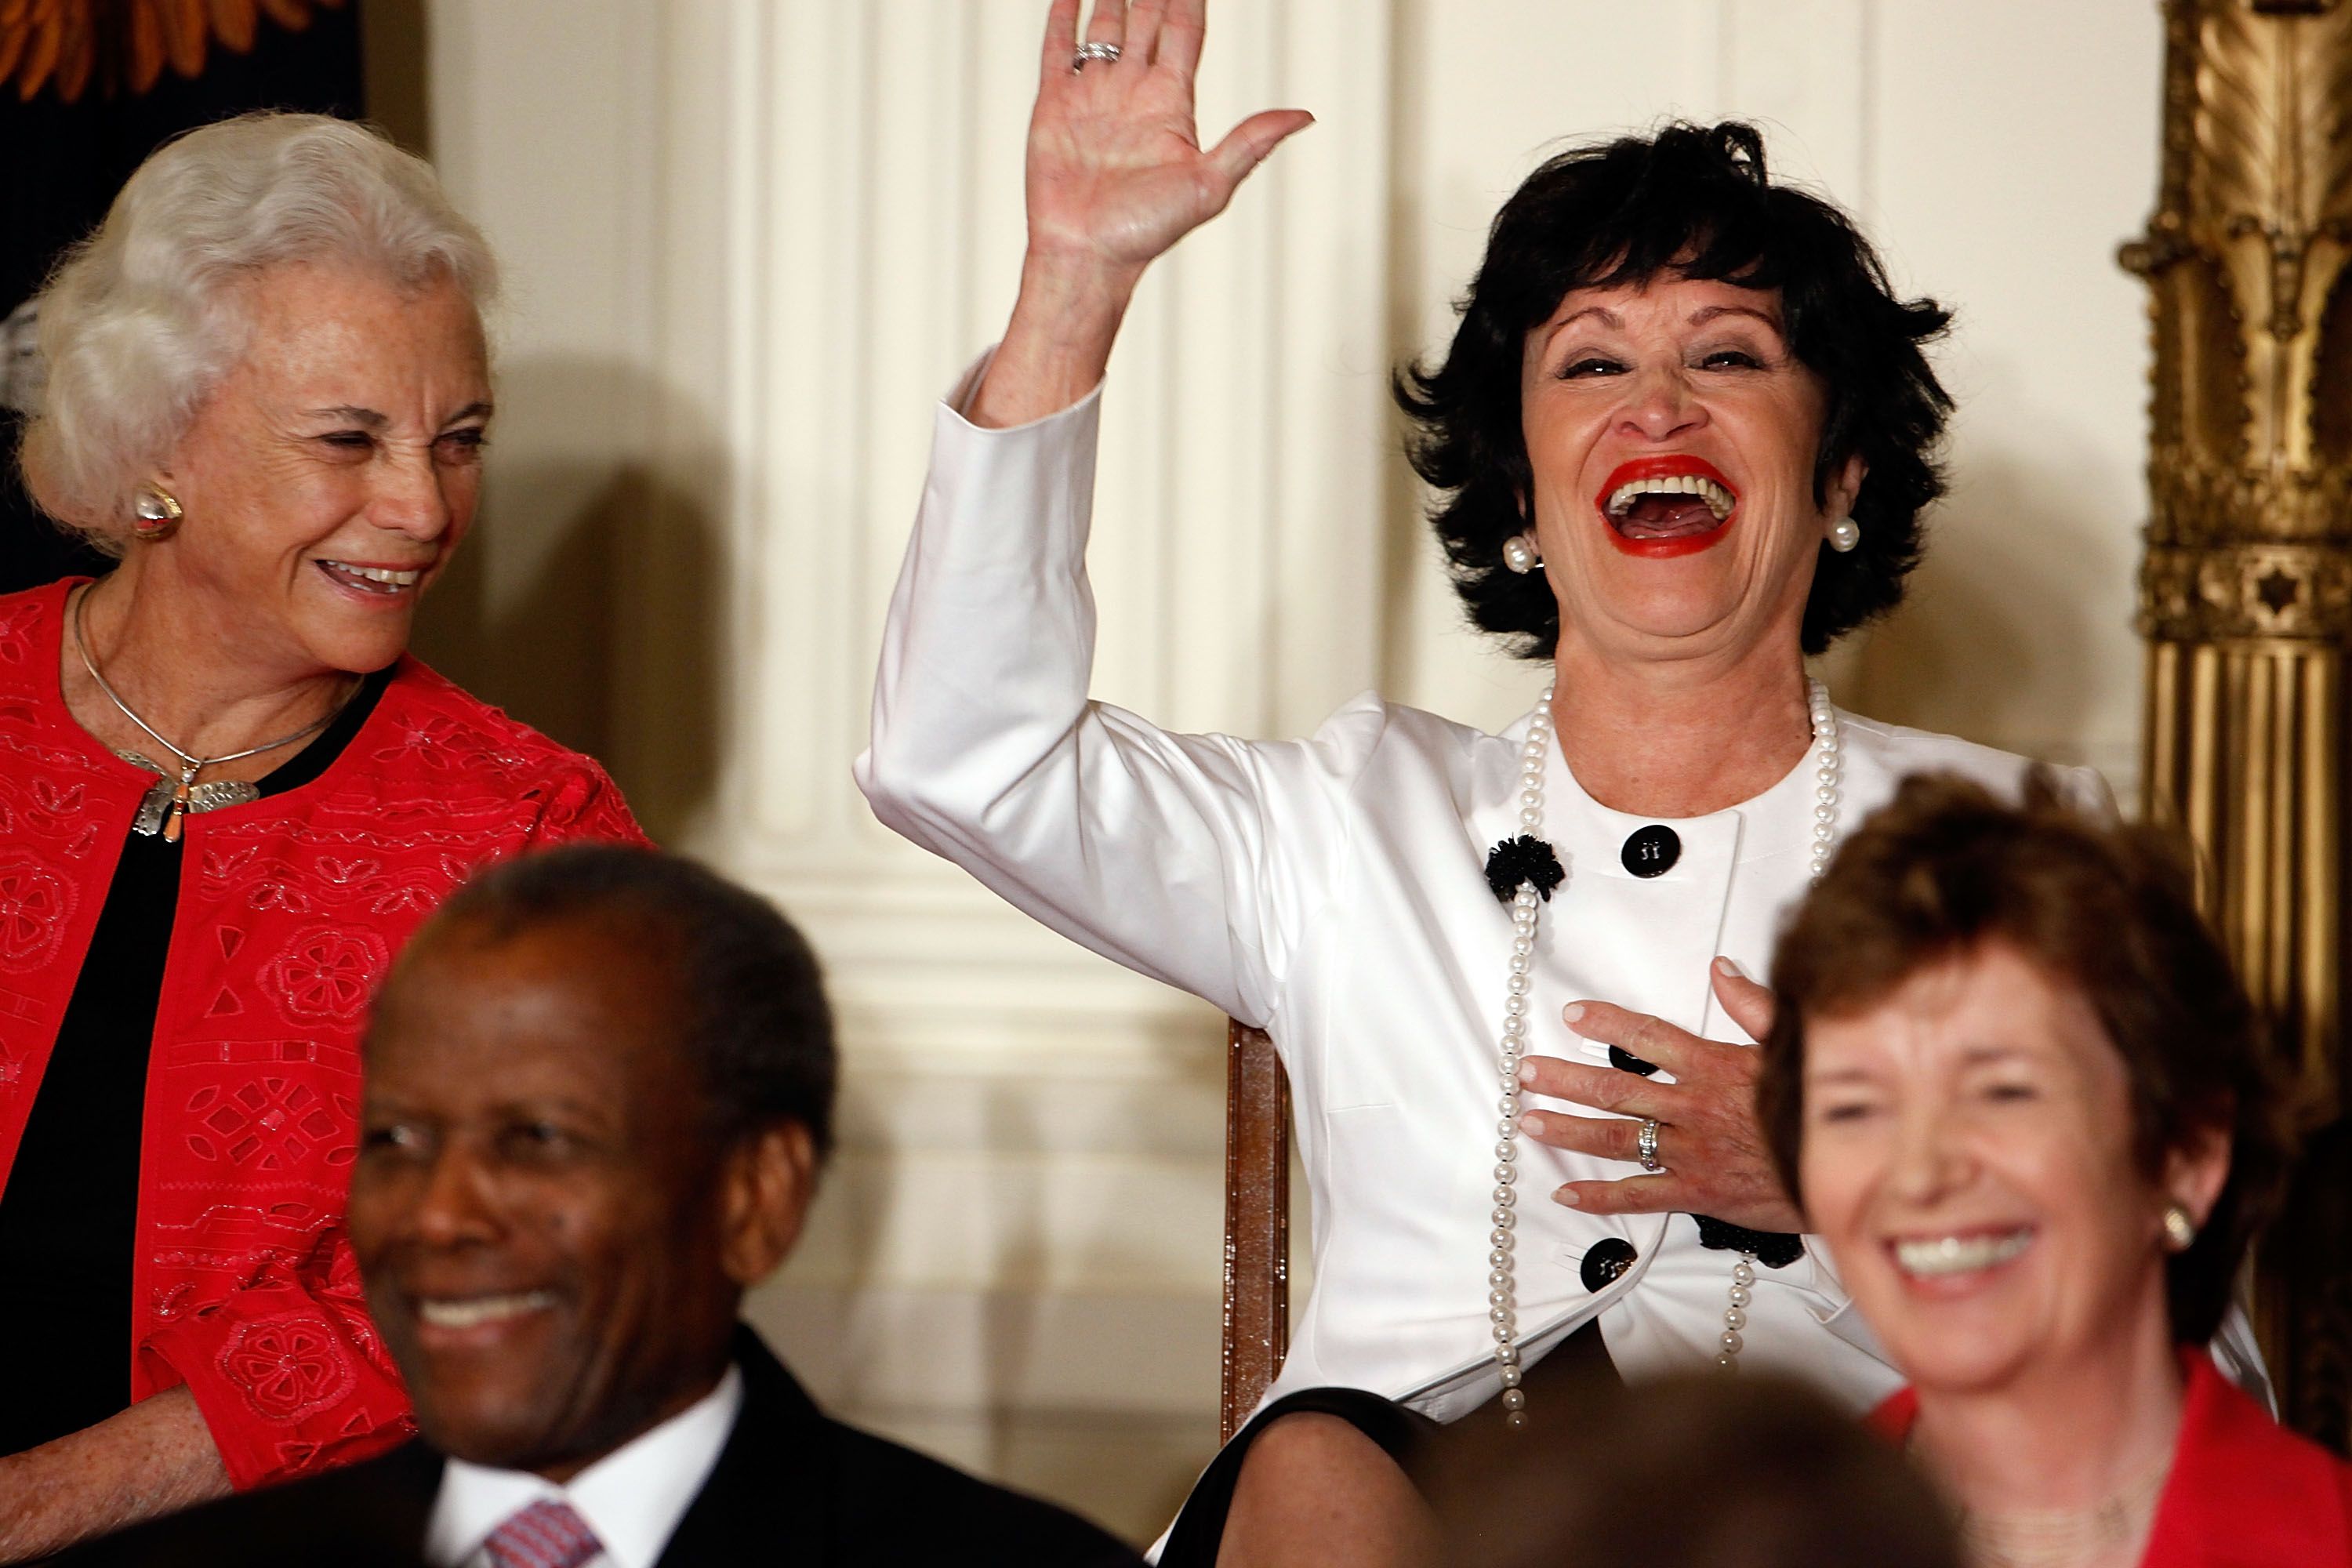 On the left, former Supreme Court Justice Sandra Day O'Connor looks and smiles at Chita Rivera, who is waving at a crowd and laughing